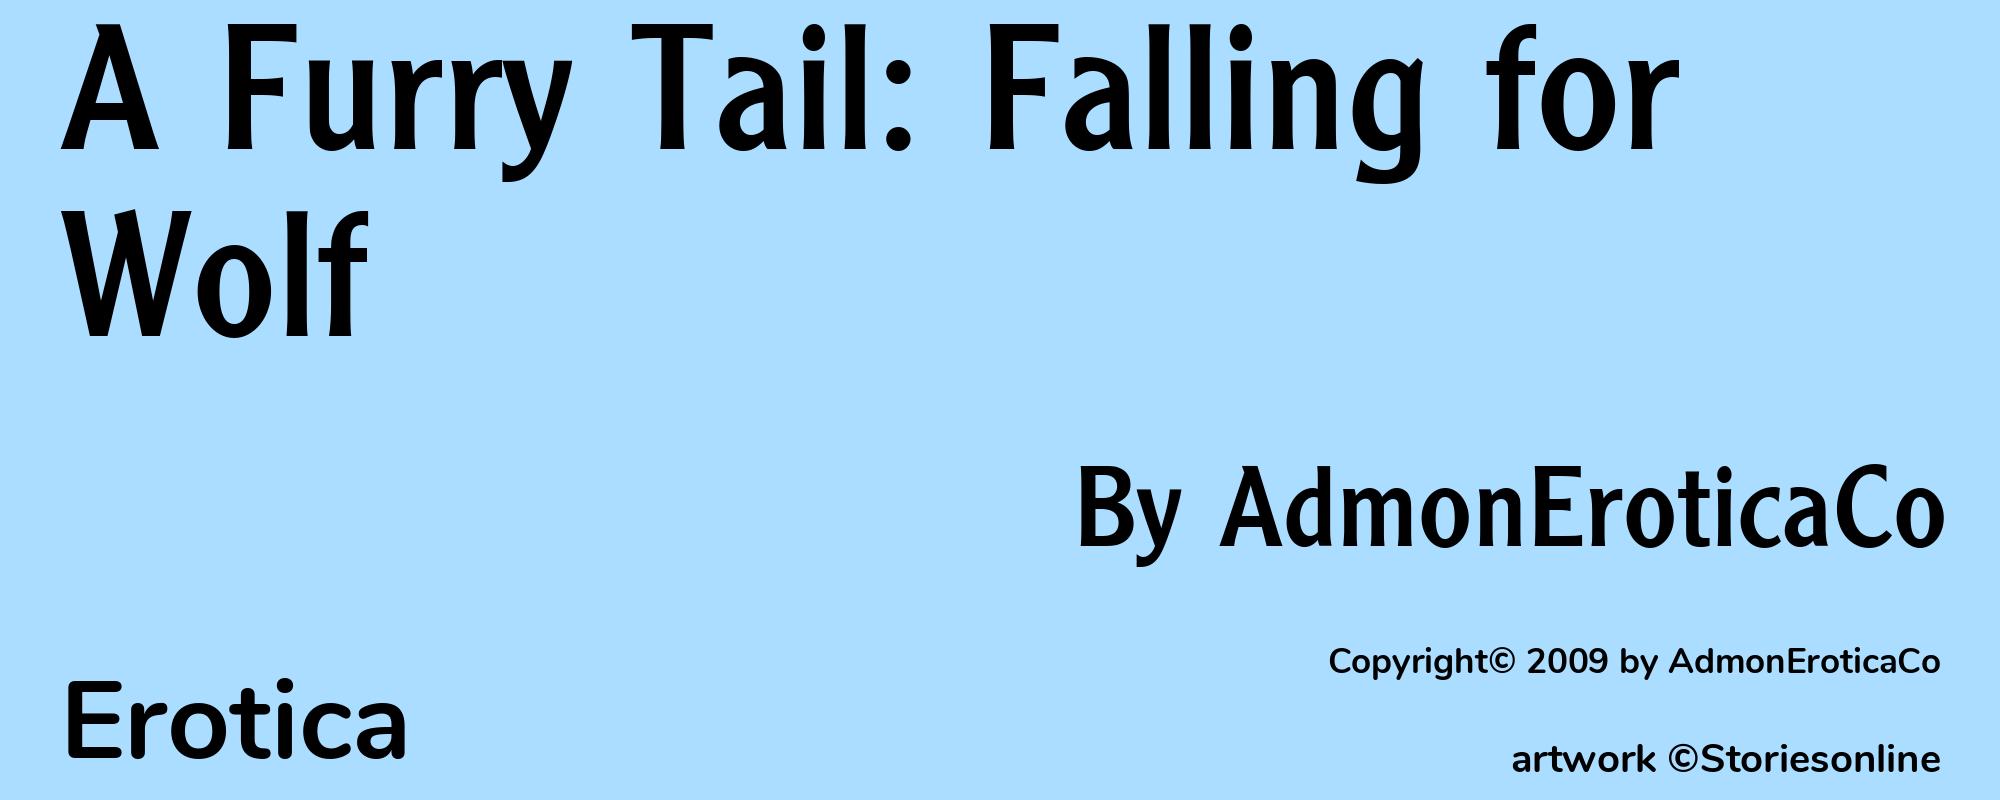 A Furry Tail: Falling for Wolf - Cover